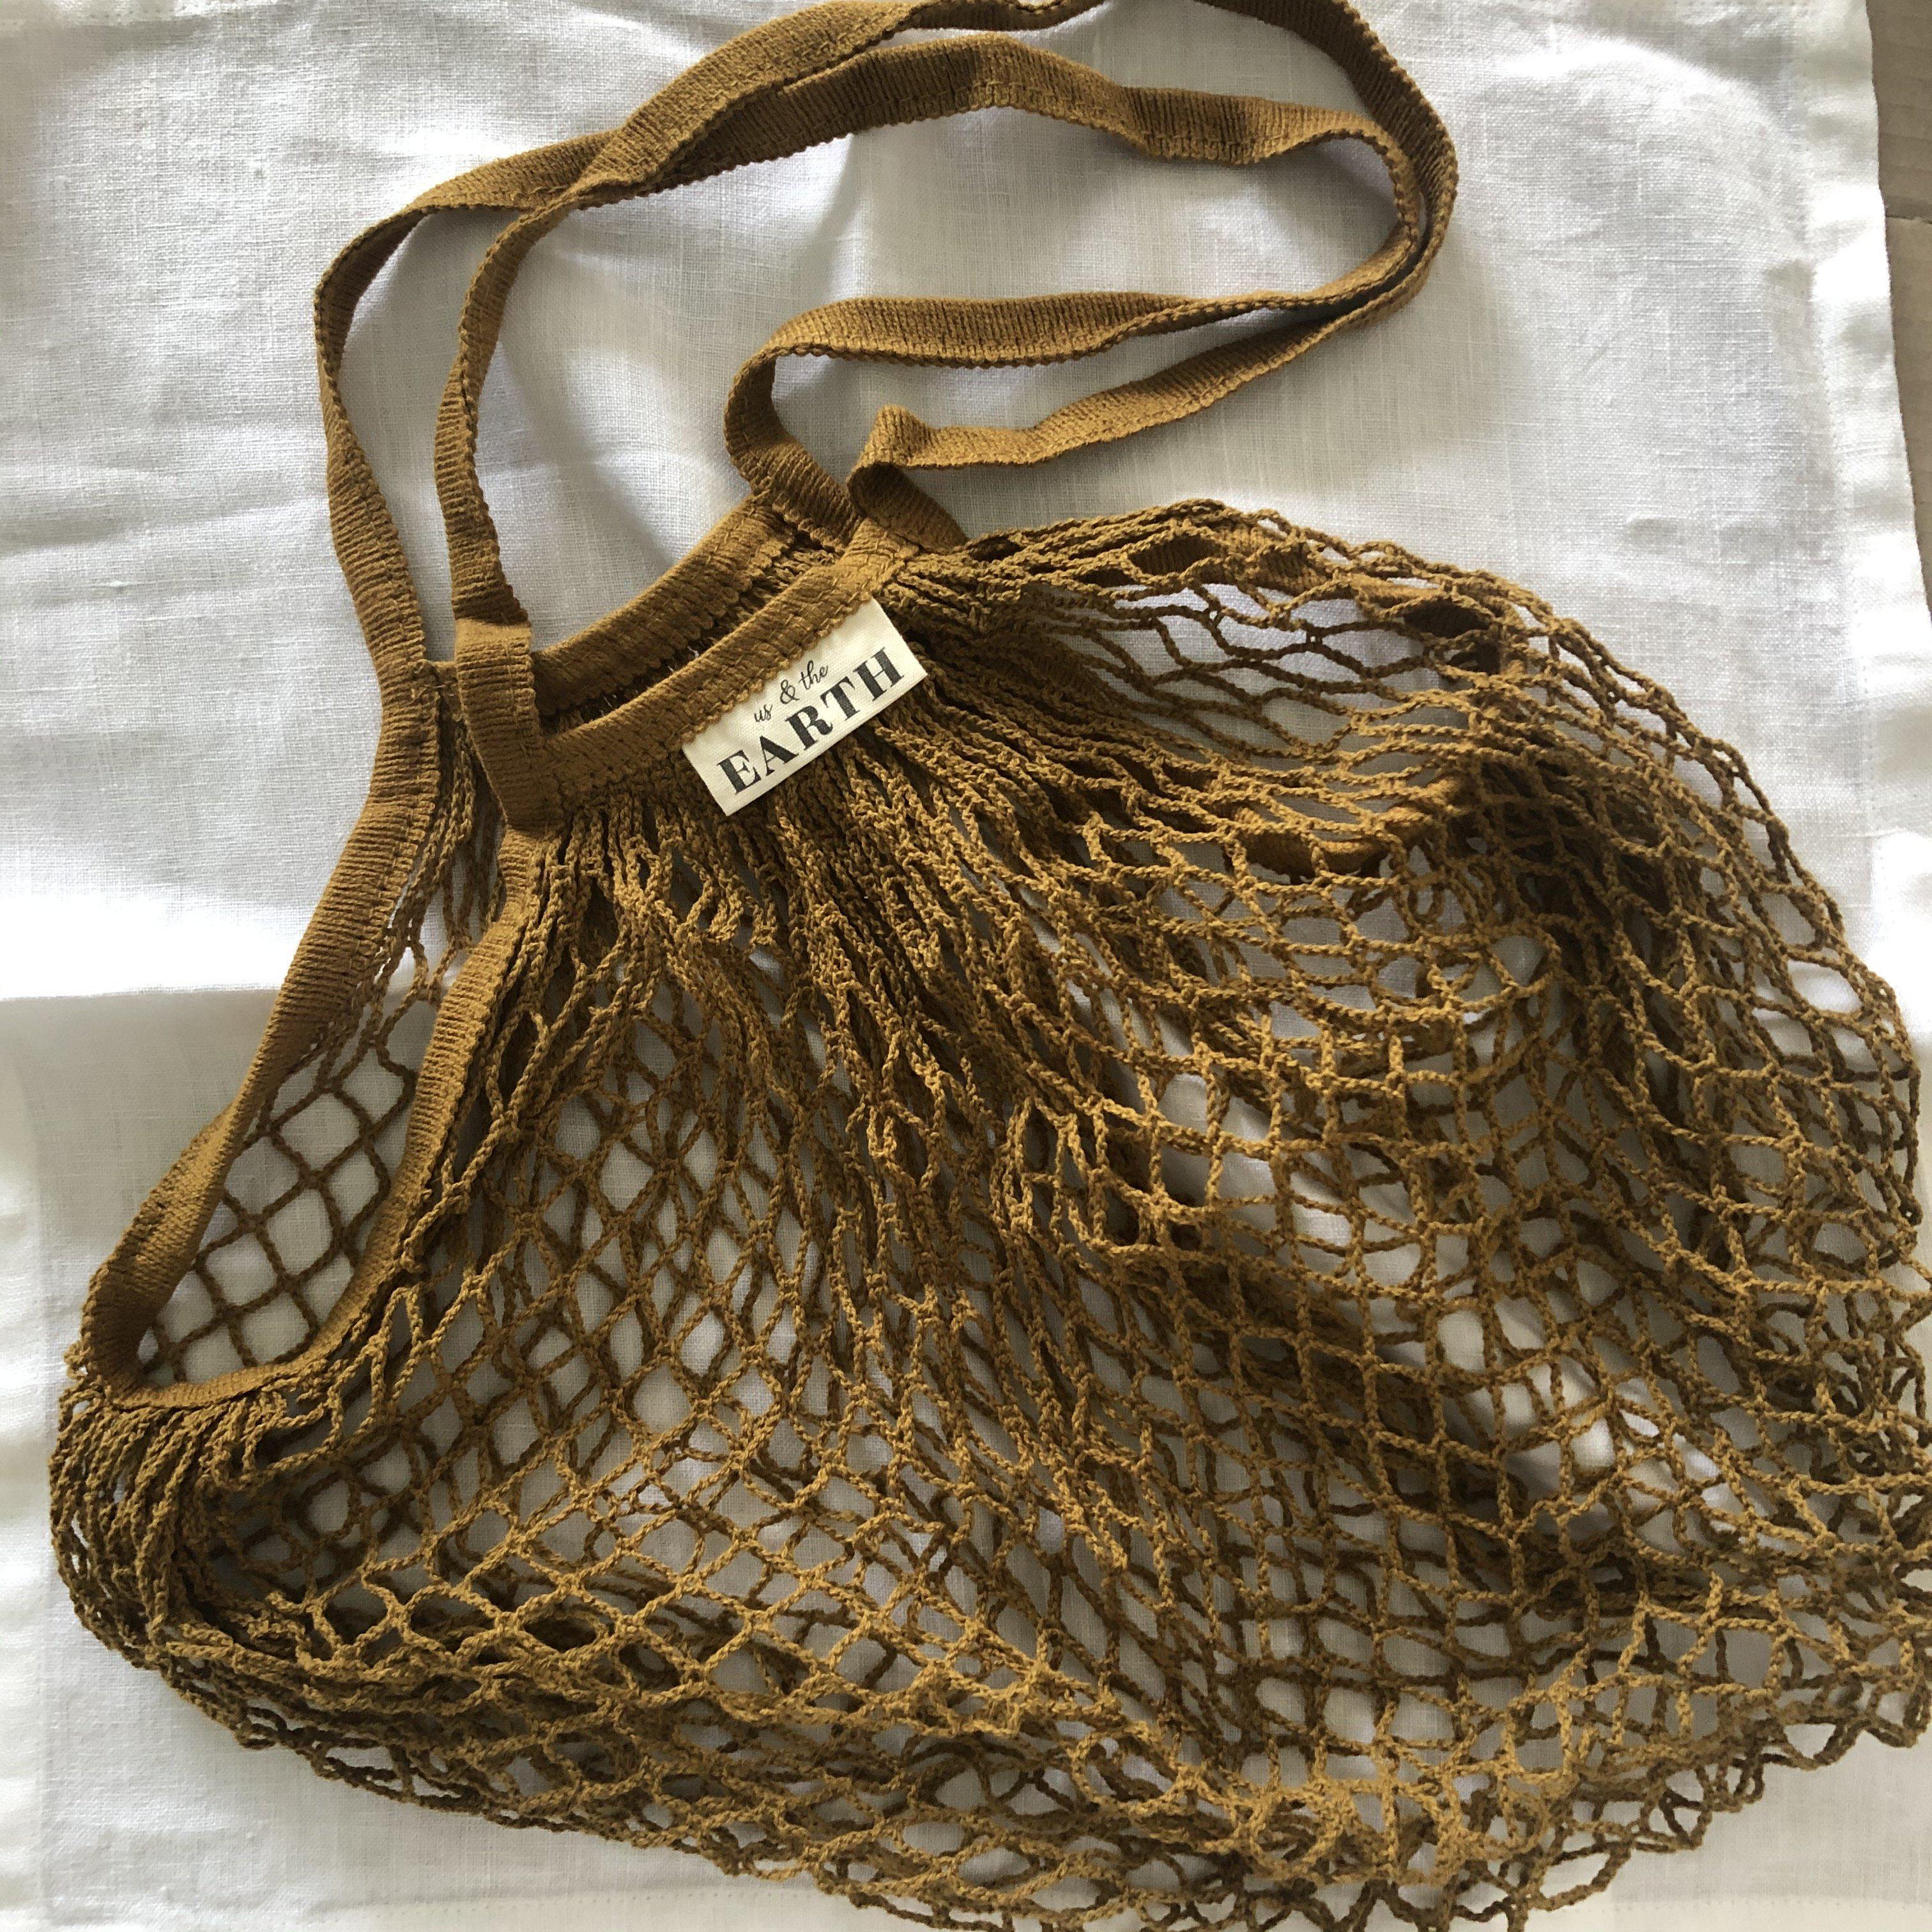 100% Organic Cotton Mesh Shopping Bag - Lightweight & VersatileSustainable Kitchen - Us and the Earth